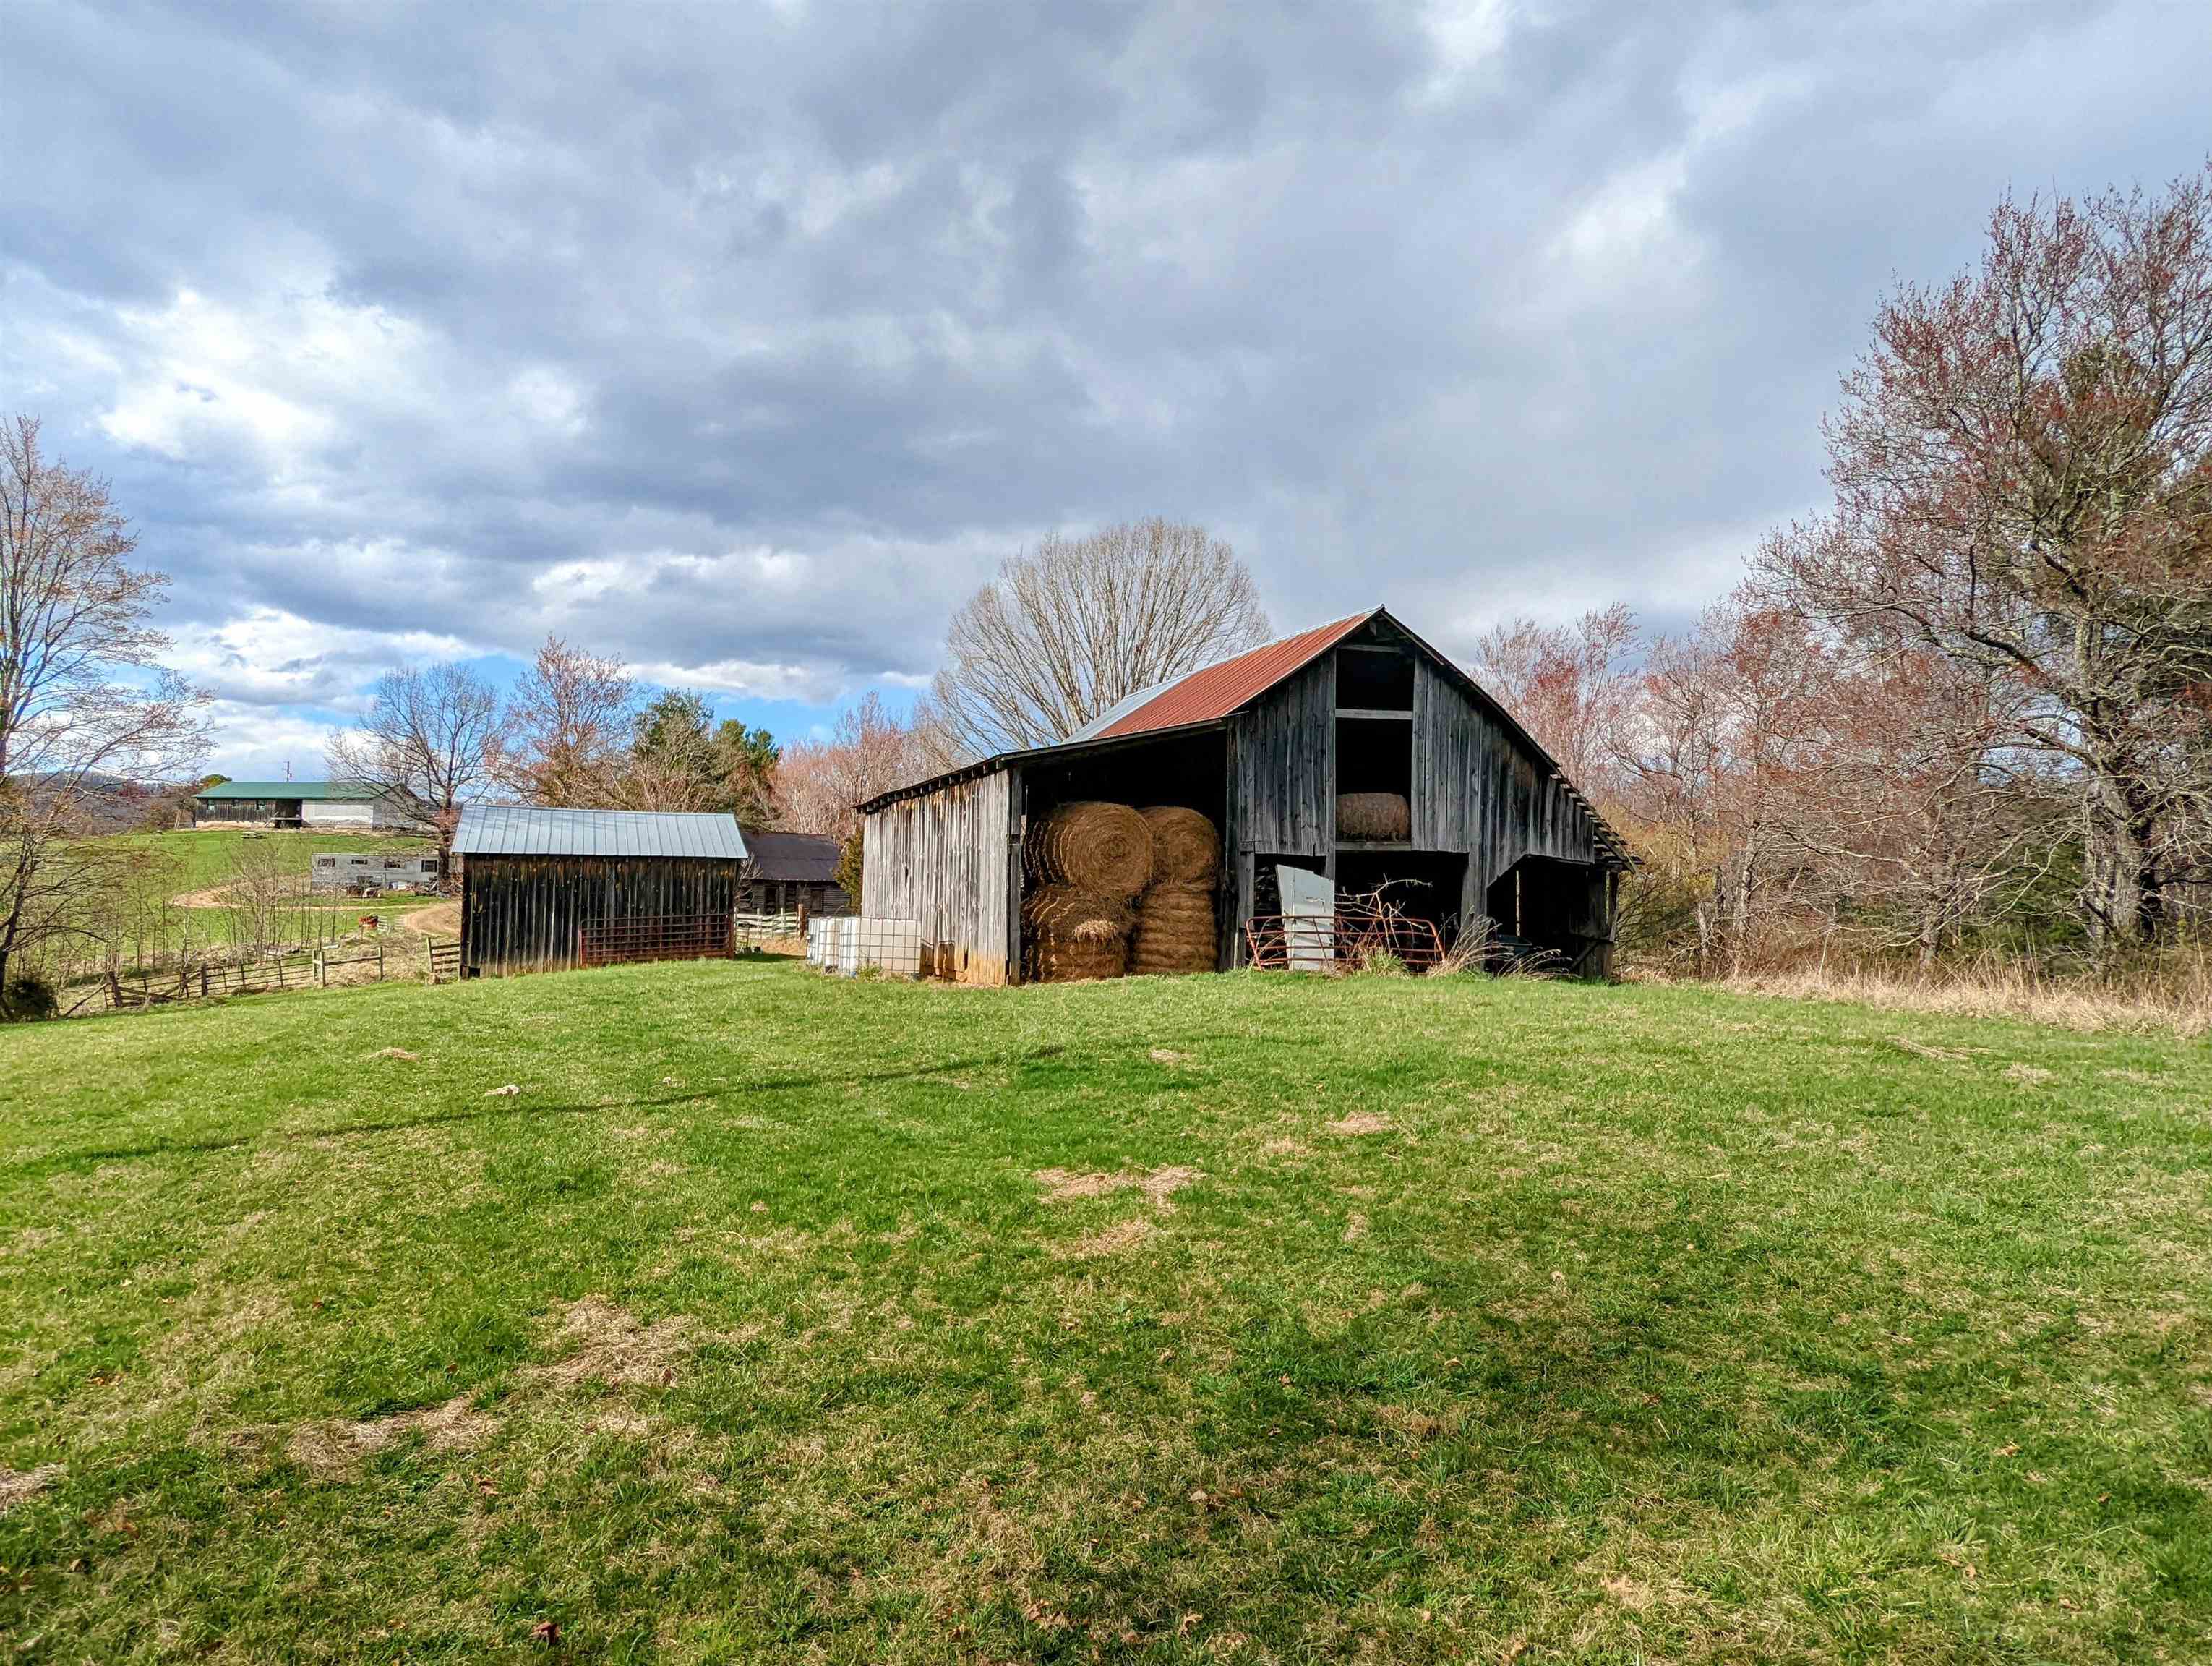 Nestled in Indian Valley, VA, this 25 +/- acre property offers a prime location near Floyd, Hillsville, Radford, and Christiansburg, VA. With a history as a working farm for cattle, this versatile land can be restored for farming, transformed into a hunting and recreation haven, or used as a potential house building site. Enjoy sweeping southern views and the tranquility of a spring-fed pond on the premises. The property features barns, sheds, and a spacious open field perfect for grazing or hay production. While fences may require some maintenance, the mix of open fields and wooded areas provides a diverse landscape. Accessed via a shared driveway on a private road, this property is currently part of a larger 35+ acre parcel. It will be subdivided to a minimum of 25 acres, with the seller retaining the remainder where their residence is situated. Interested buyers also have the option to acquire the entire property, with the seller retaining a life estate at the residence.